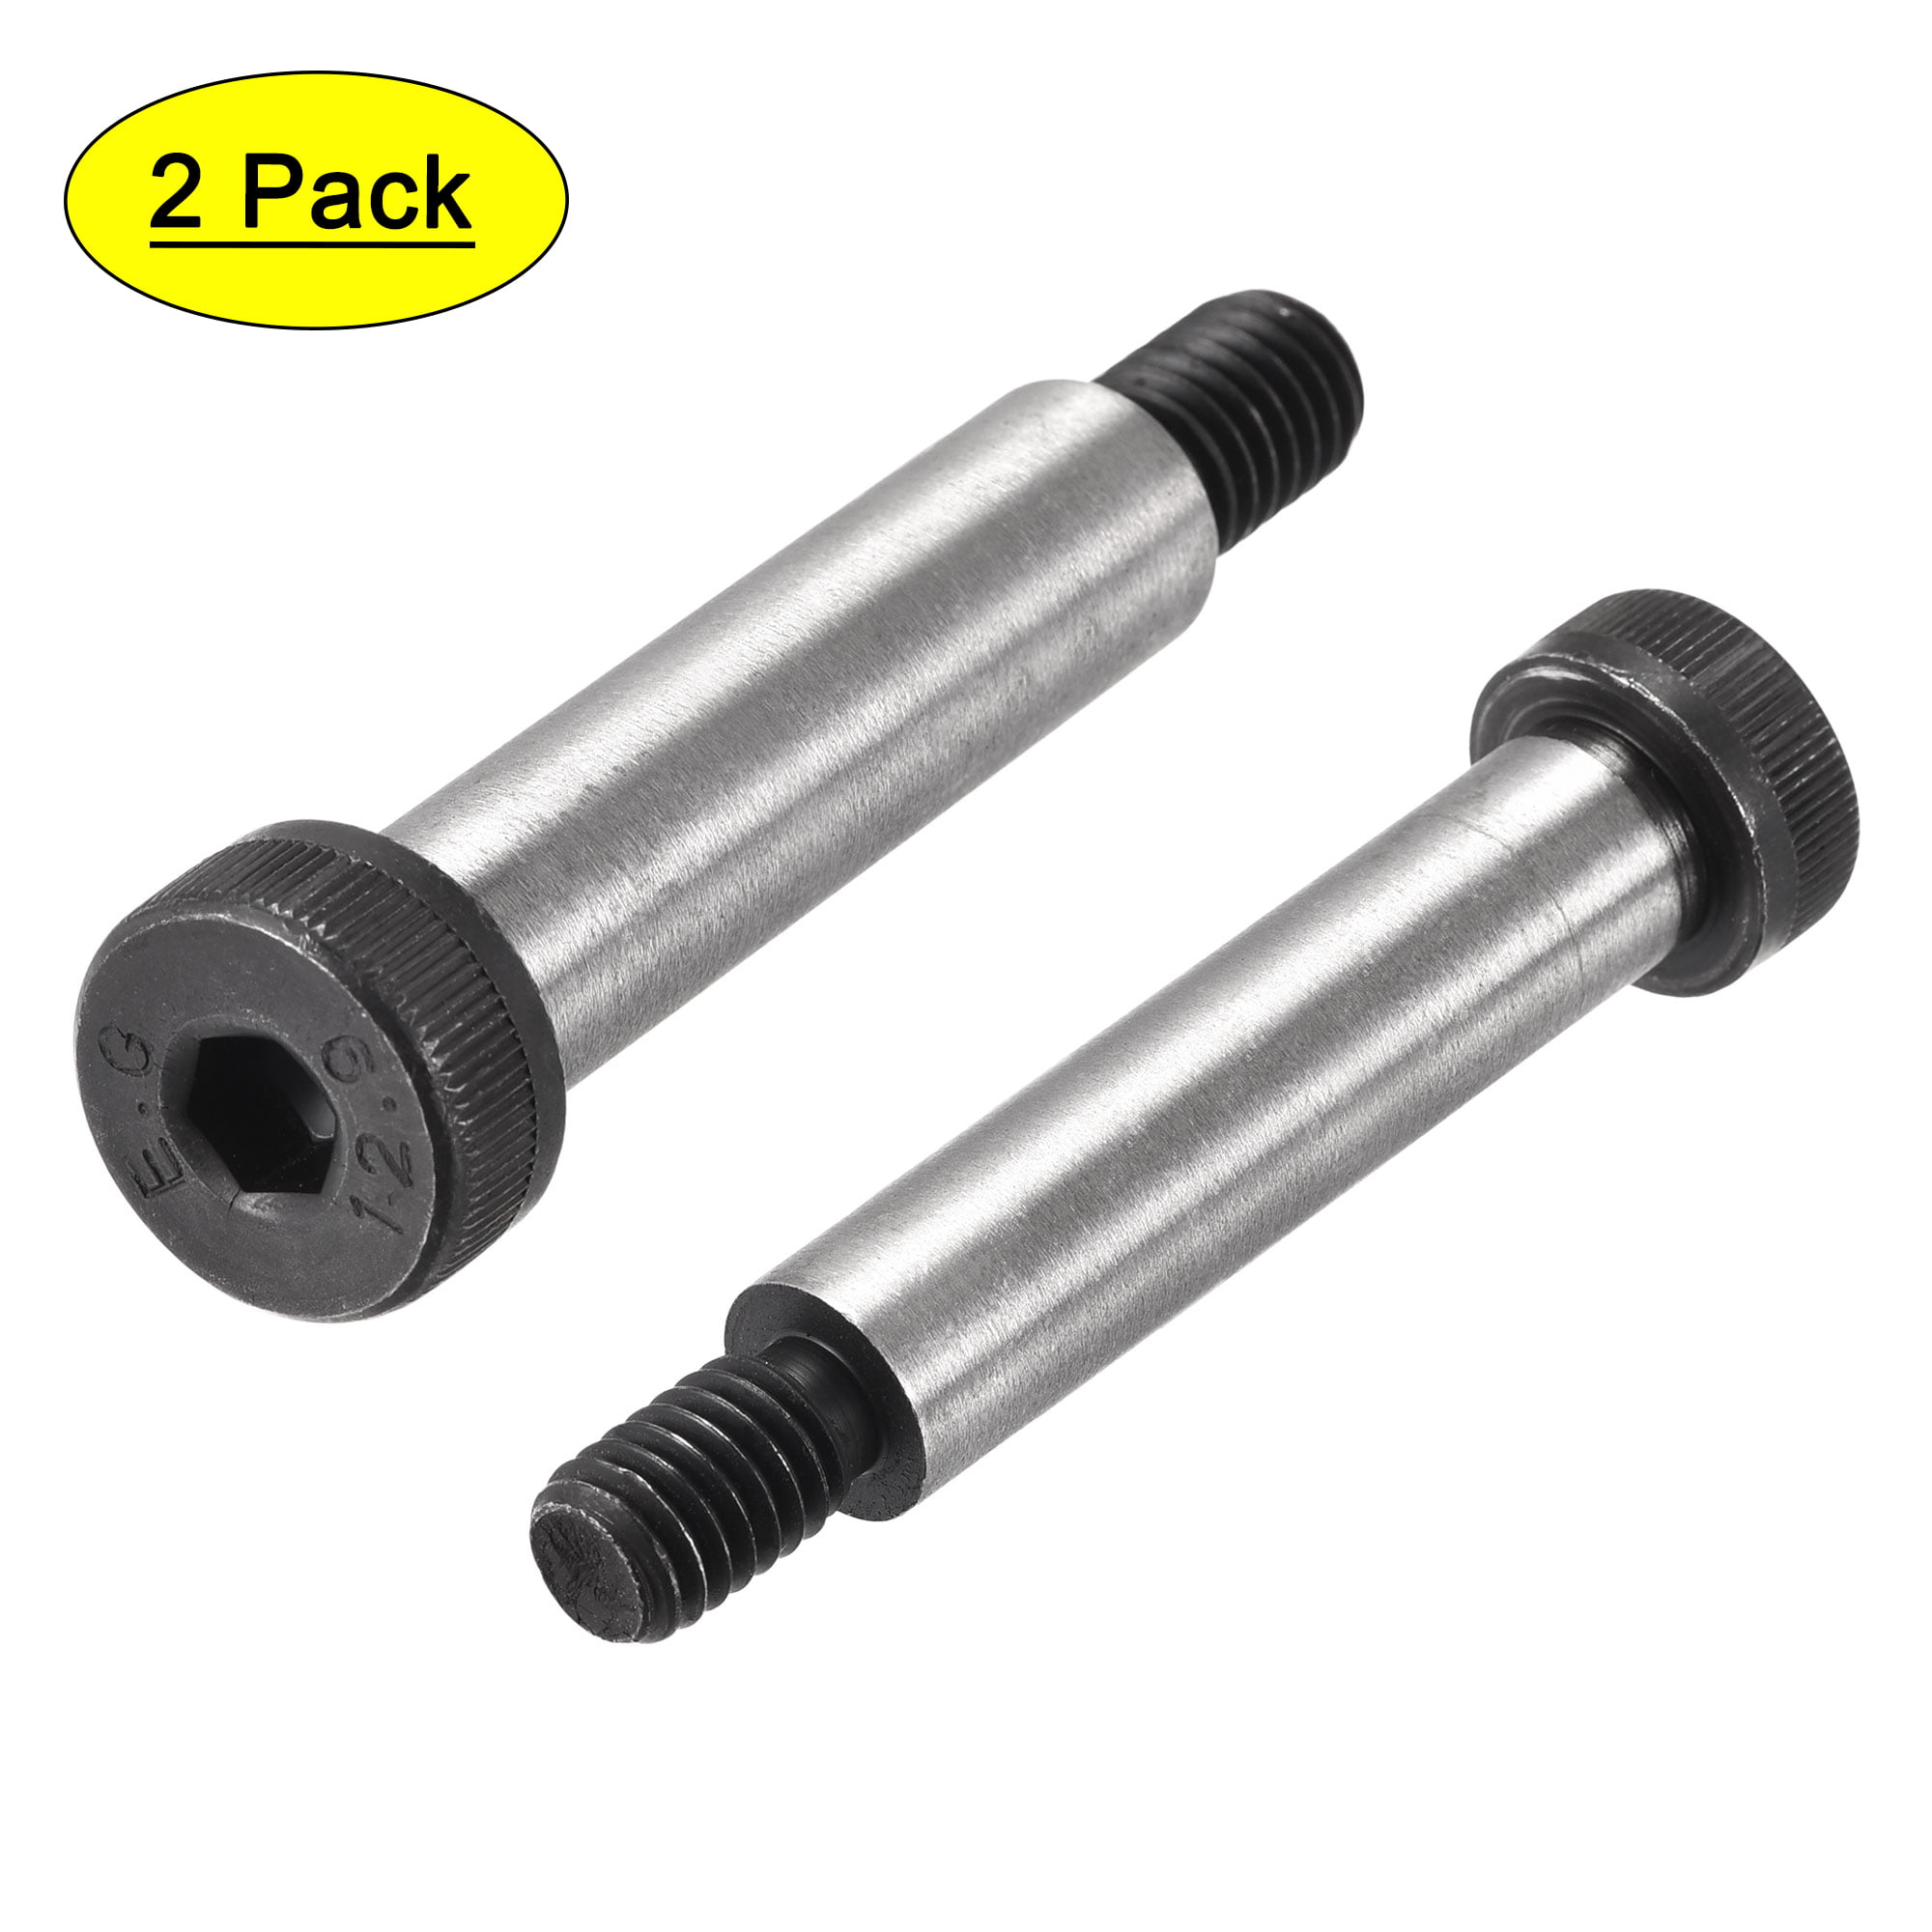 10 Of Eye Bolt With Nuts And Washers M8 X 150Mm Bzp Weatherproof 